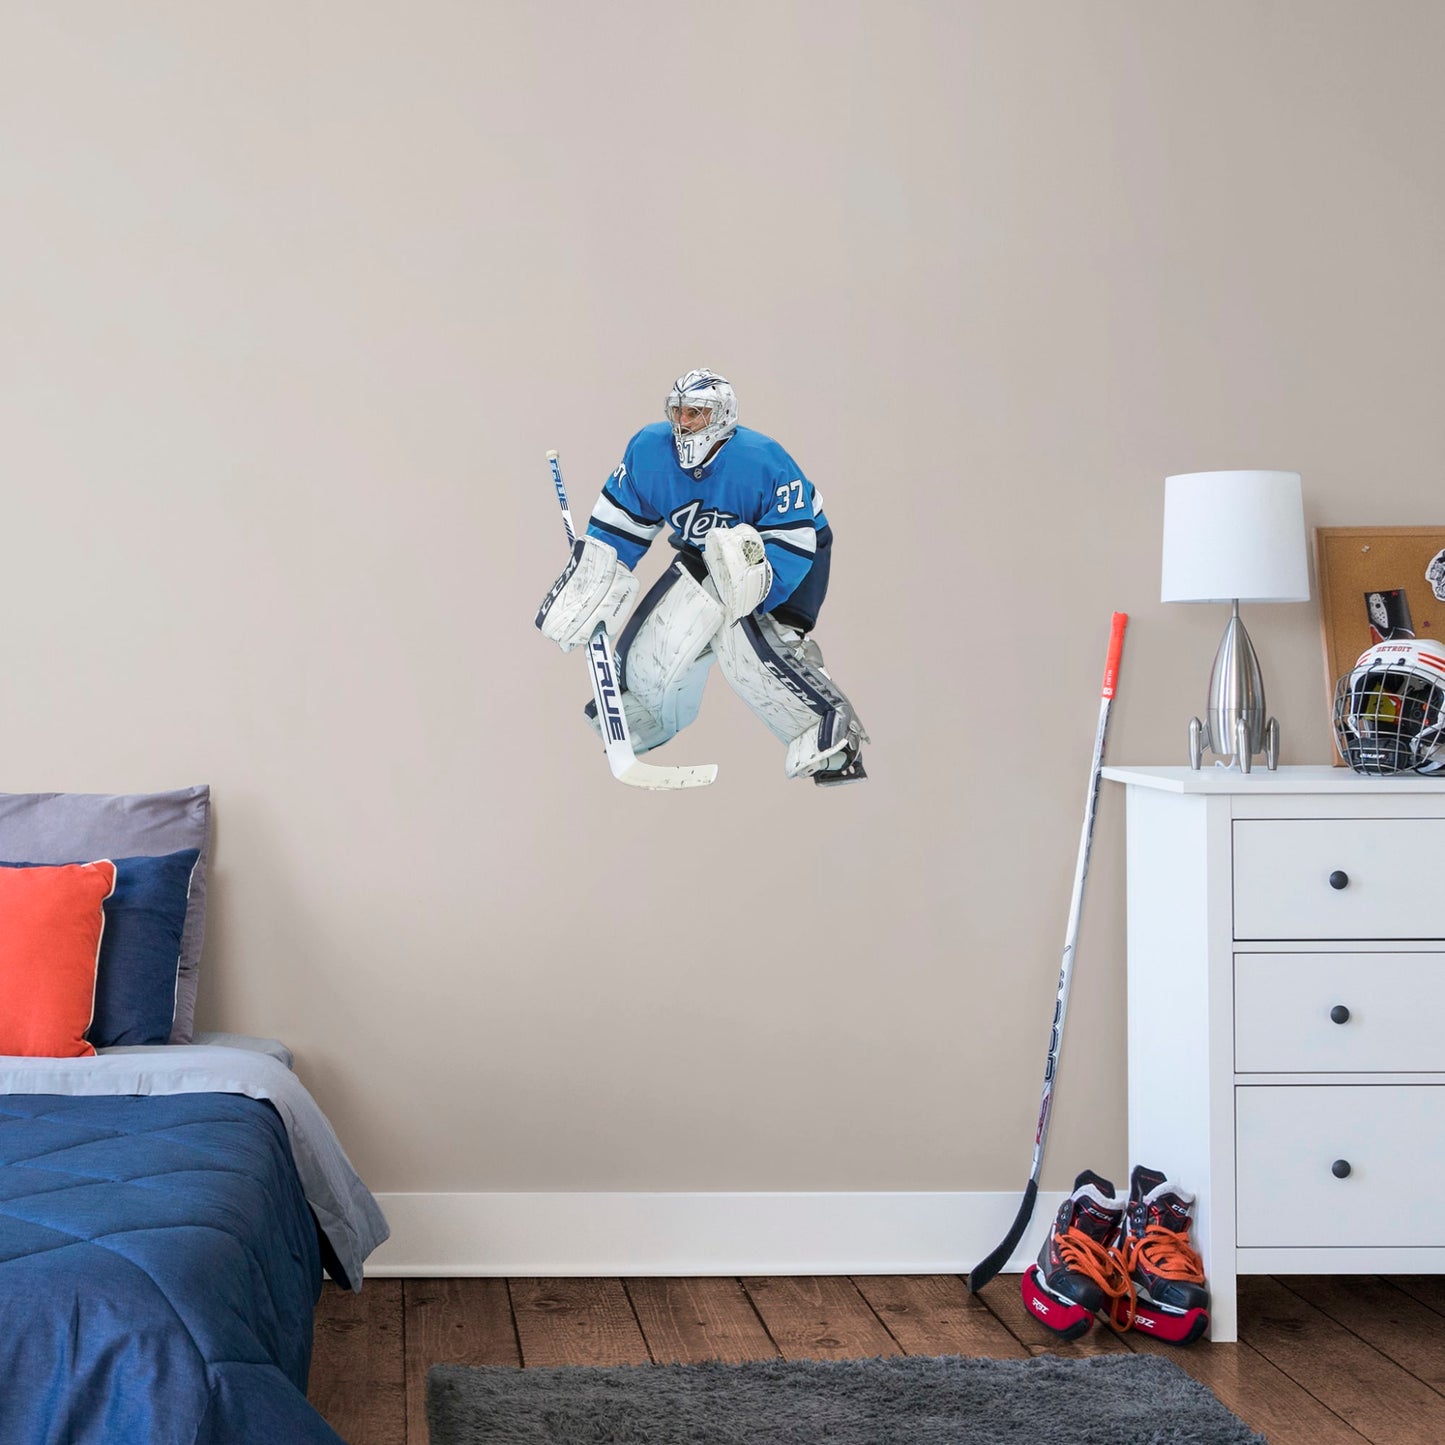 X-Large Athlete + 2 Decals (24"W x 31"H) Opposing teams should be worried when they see Connor Hellebuyck in the goal, and now you can bring his epic defense skills to life in your own home with this Officially Licensed NHL removable wall decal. Pictured here ready to stop any puck that comes his way, this wall decal of Hellebuyck will make the perfect addition to your bedroom, office, or fan room, and it even makes a great gift for your favorite Jets fanatic!